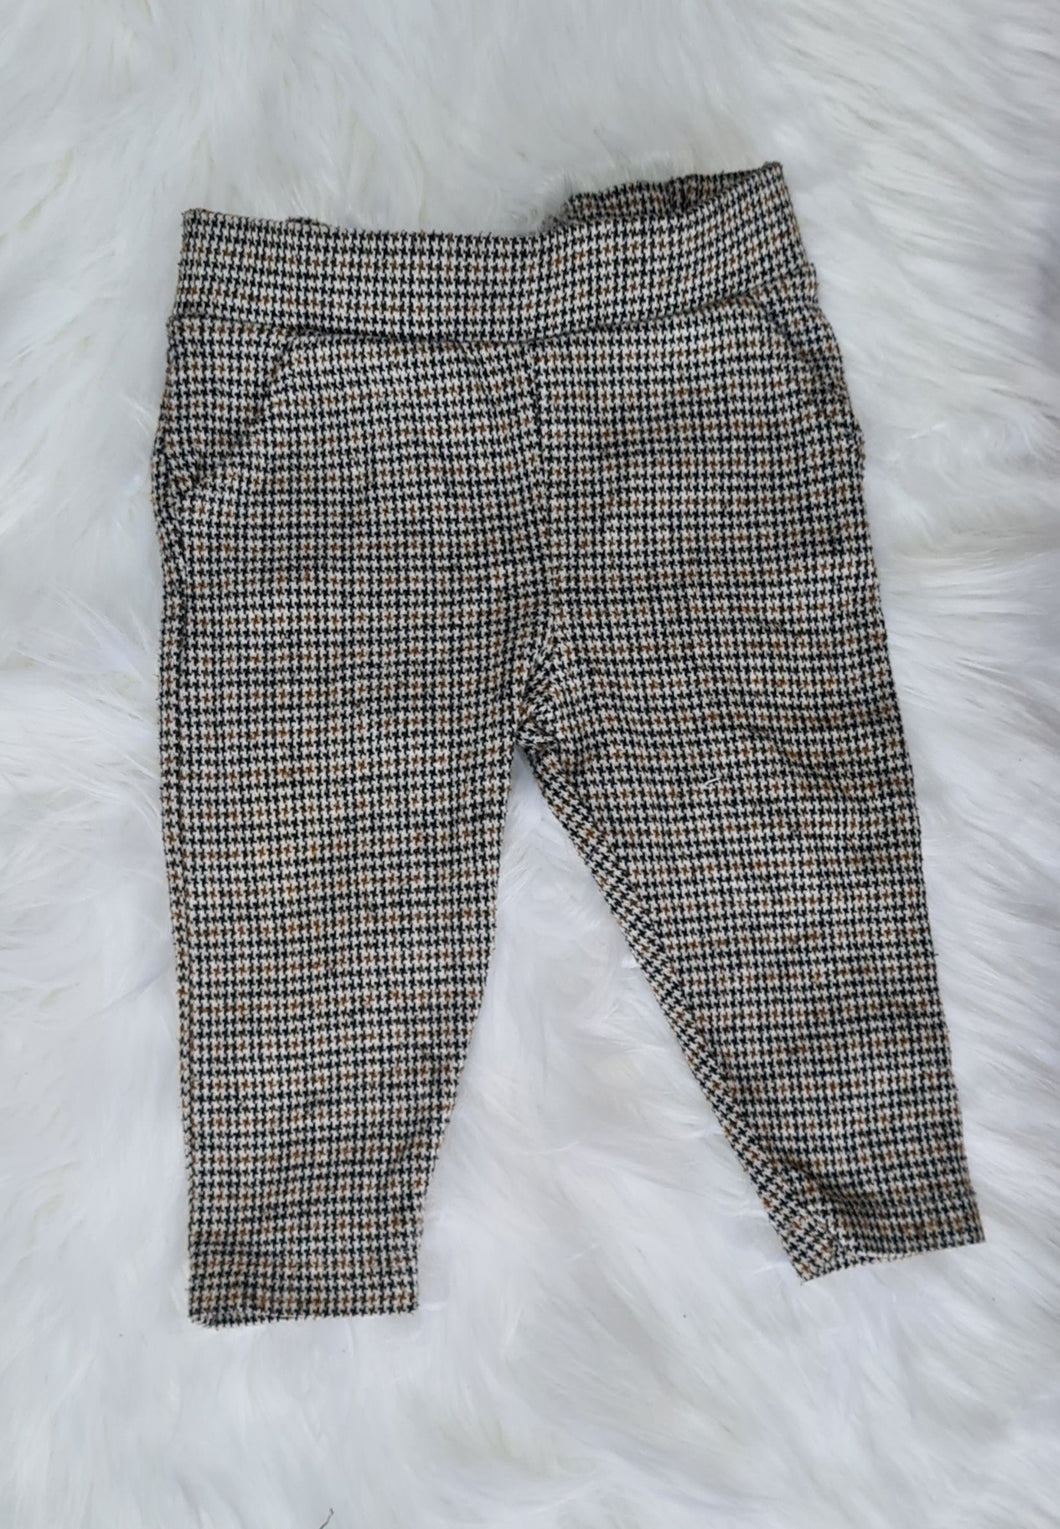 Boys 9-12 Months - River Island Chequered Trousers